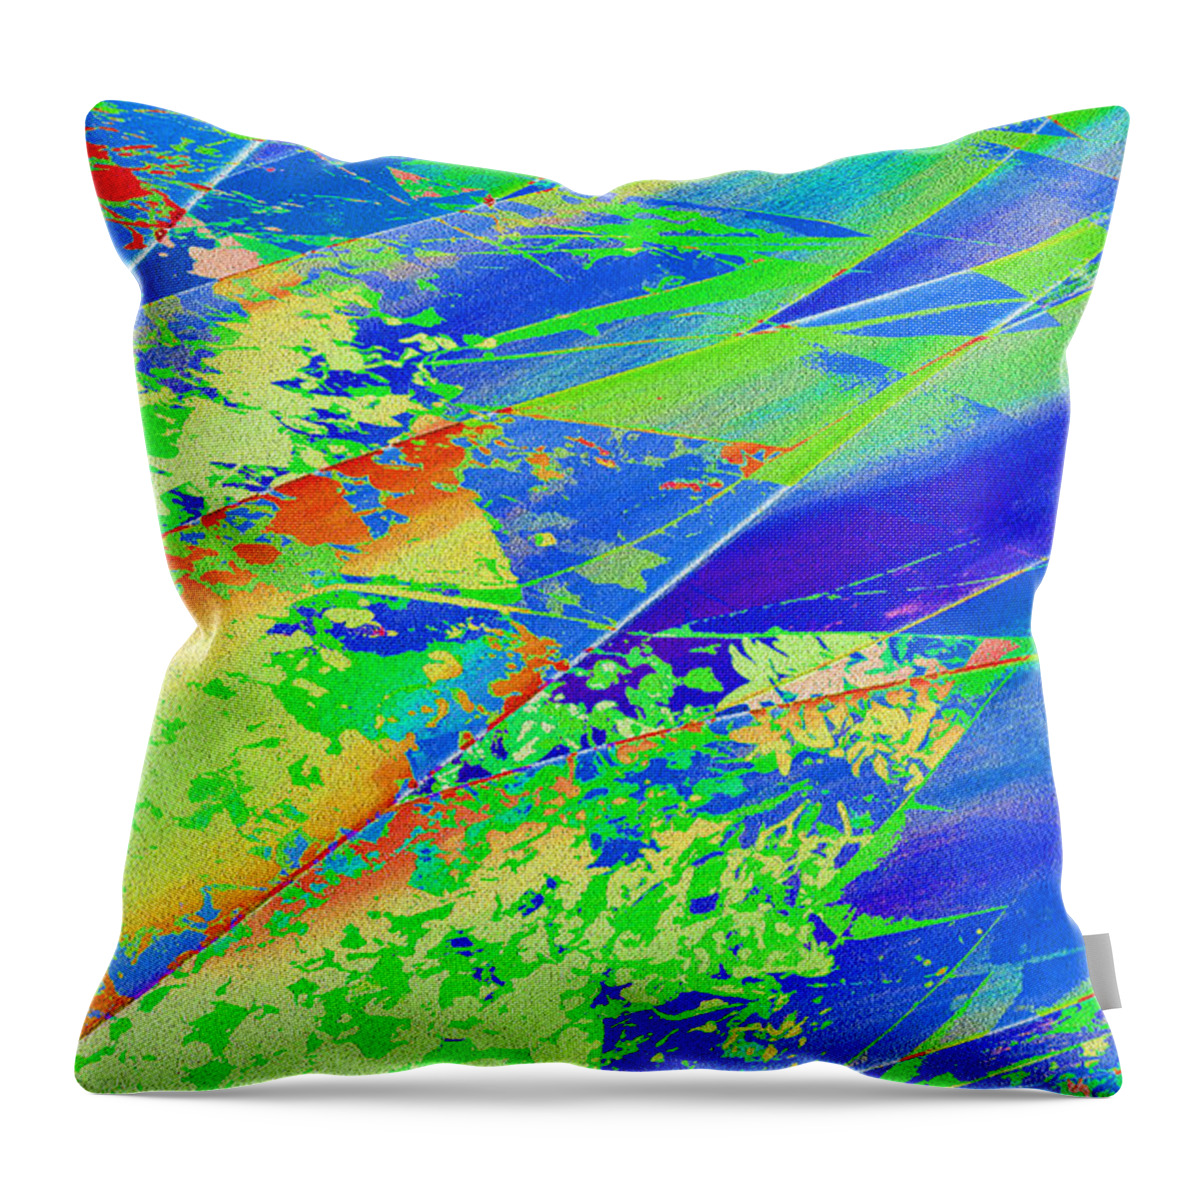 Agave Throw Pillow featuring the digital art Agave Abstract by Stephanie Grant